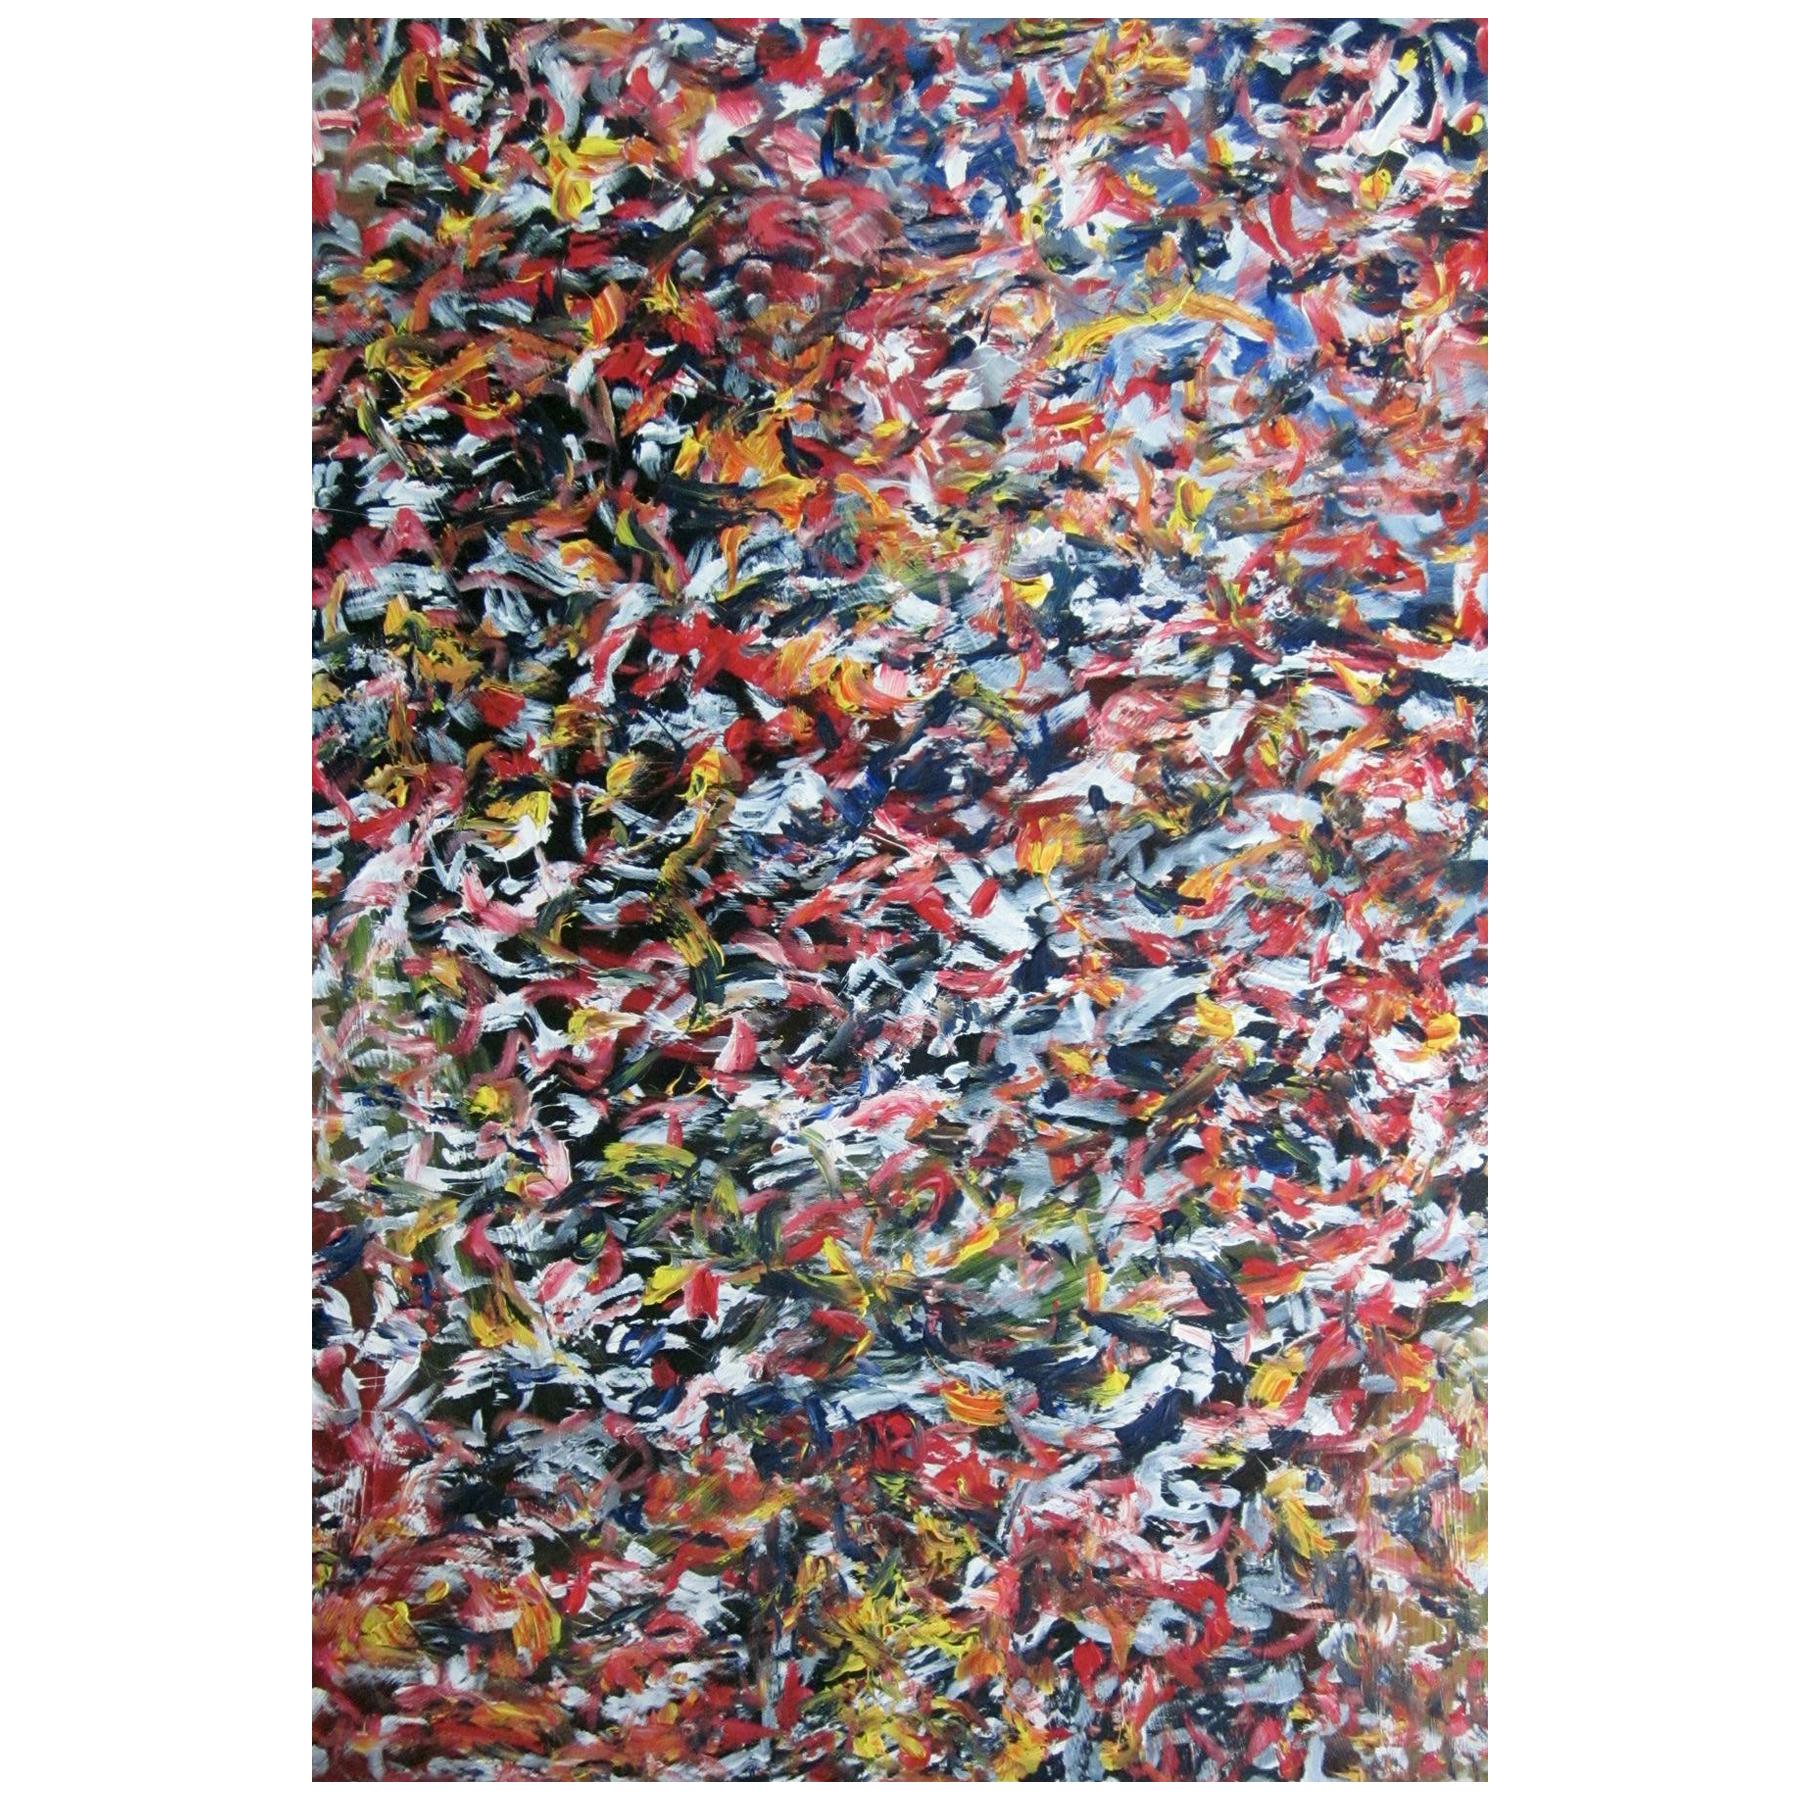 Abstract Acrylic on Canvas Painting "Of The Game" by Alexander Hecht